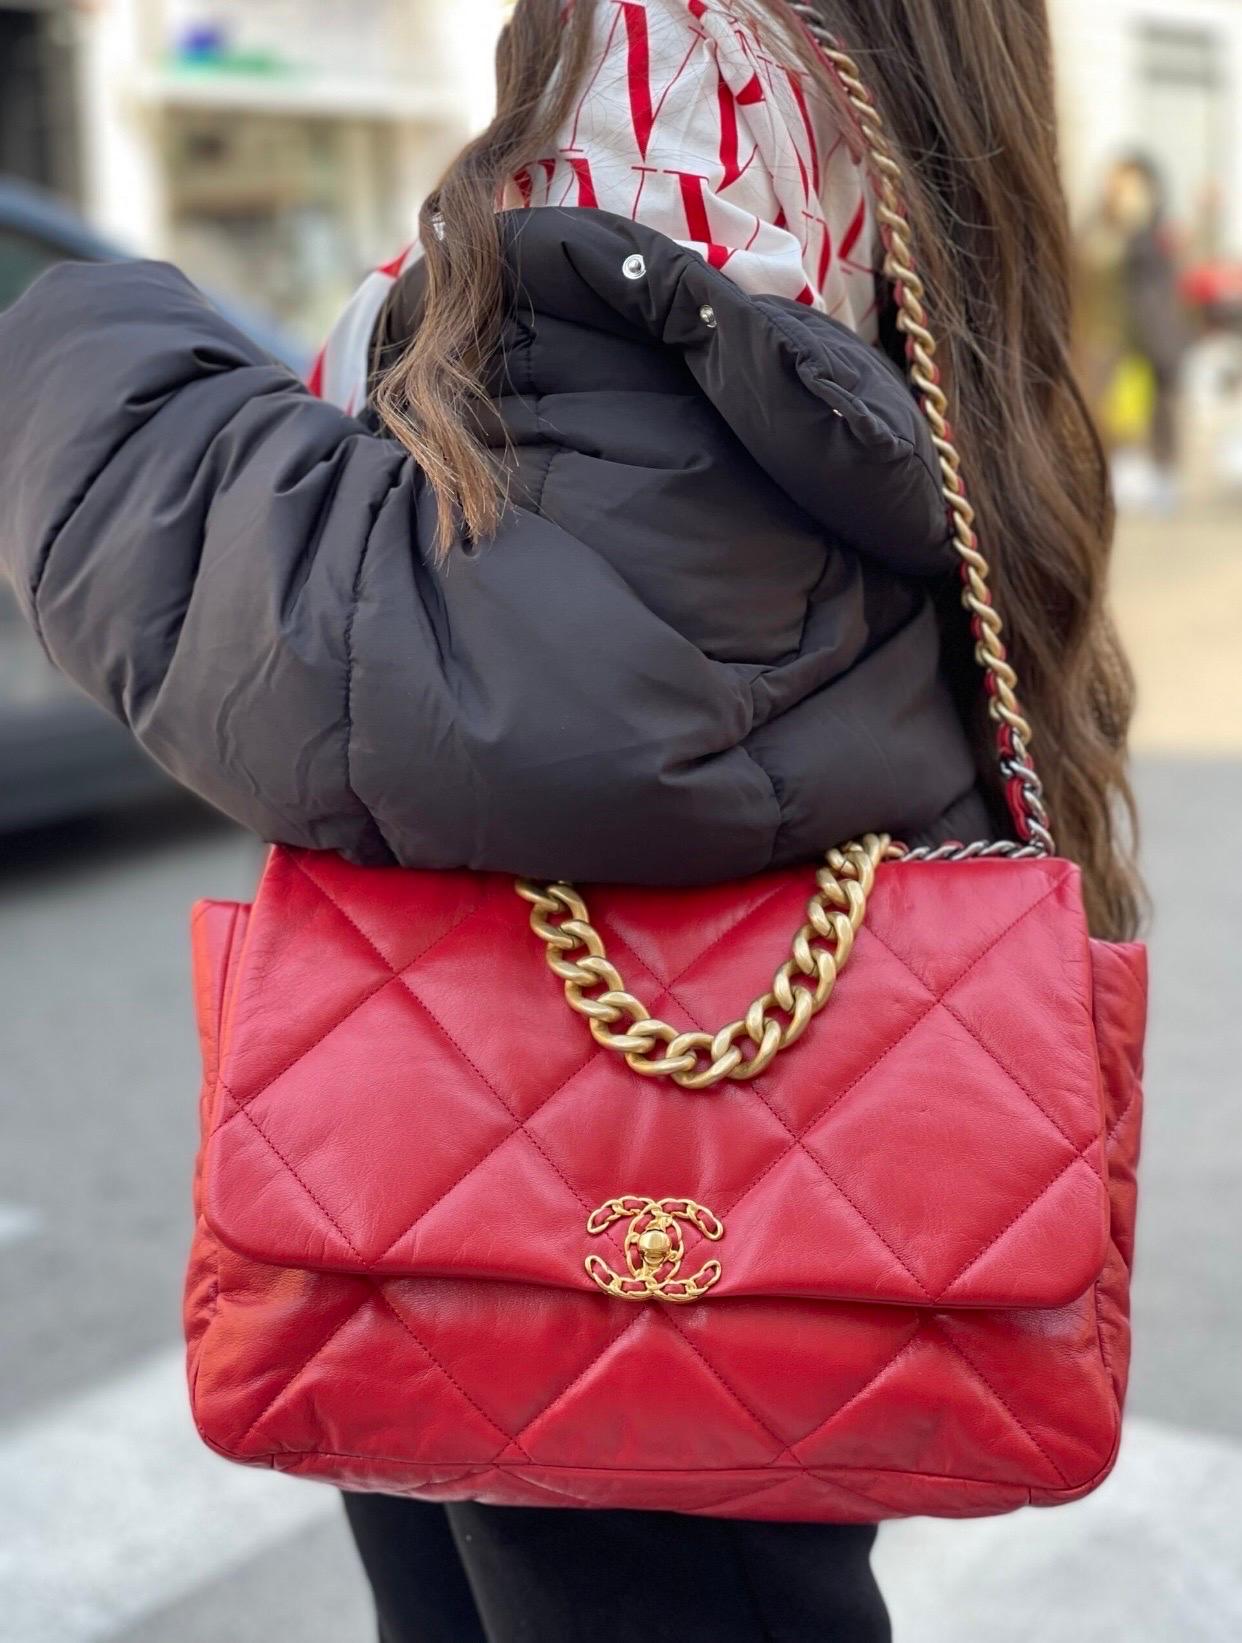 Chanel signed bag, Chanel 19 model, made of red quilted leather with golden hardware.

Equipped with an interlocking closure with CC logo, internally lined in red fabric, very roomy.

Equipped with a two-tone chain shoulder strap and a handle that